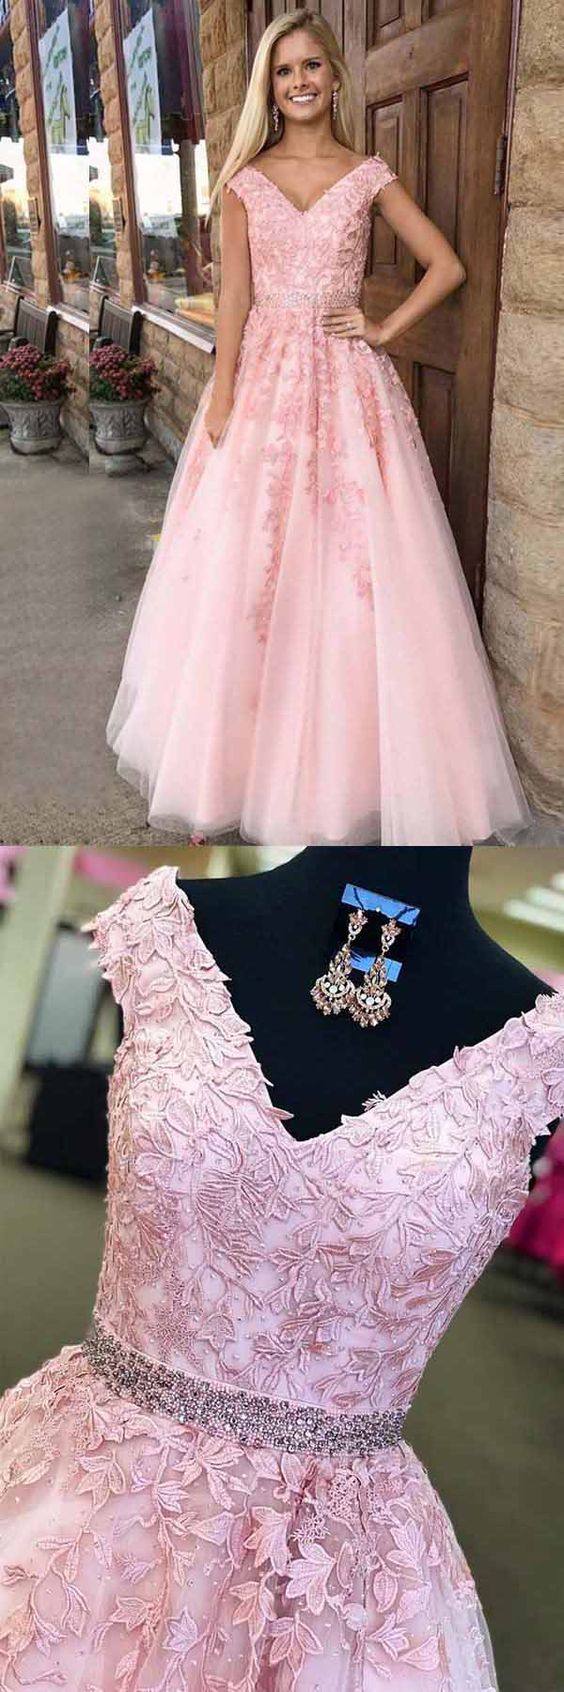 A-line V-neck Cap Sleeves Pink Tulle Beaded Appliques Prom Dress M0824